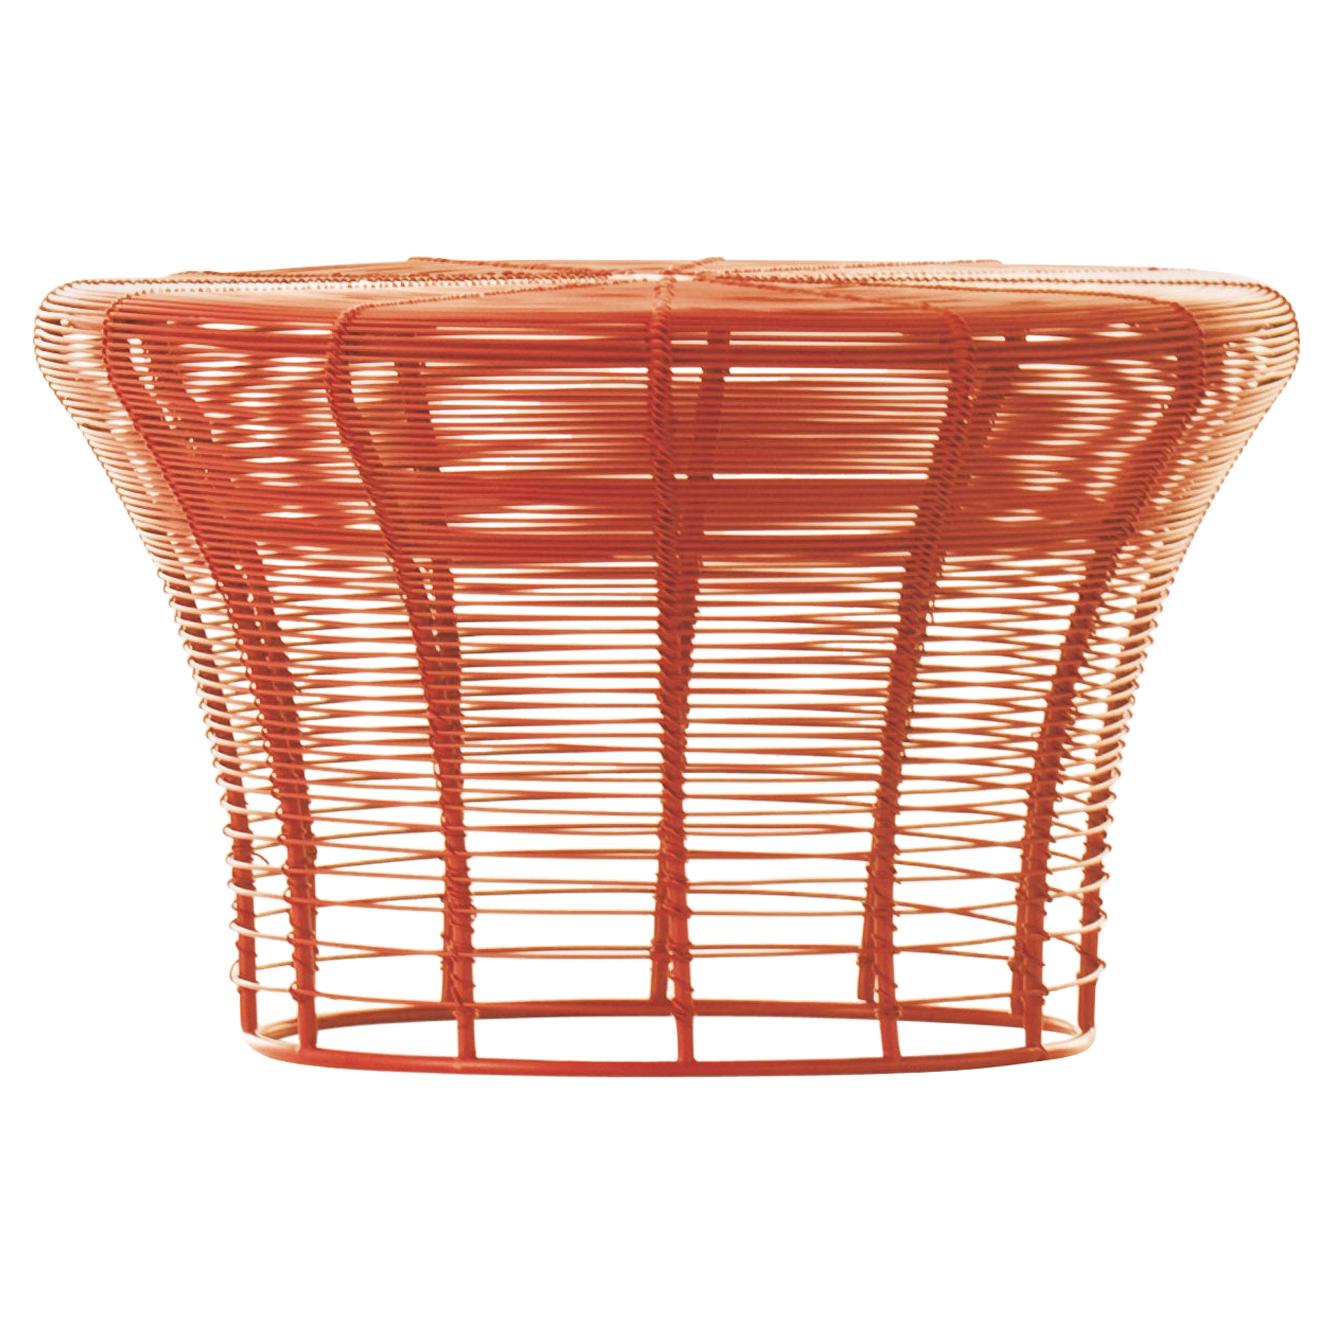 GAN Aram Low Stool in Red and Orange by Nendo